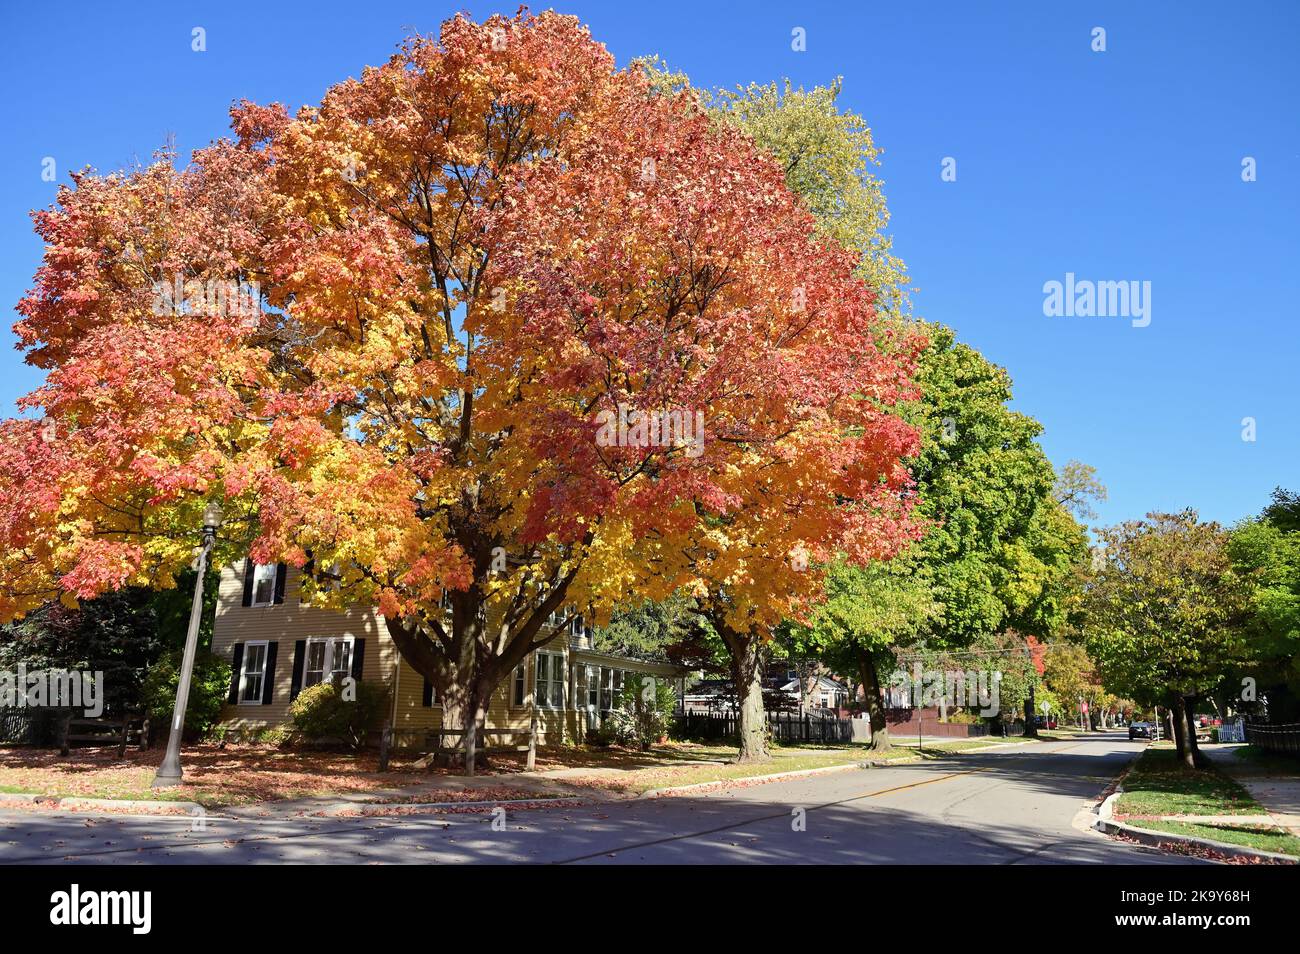 Naperville, Illinois, USA. The beauty and color of the autumn season in evidence on the campus of North Central College. Stock Photo